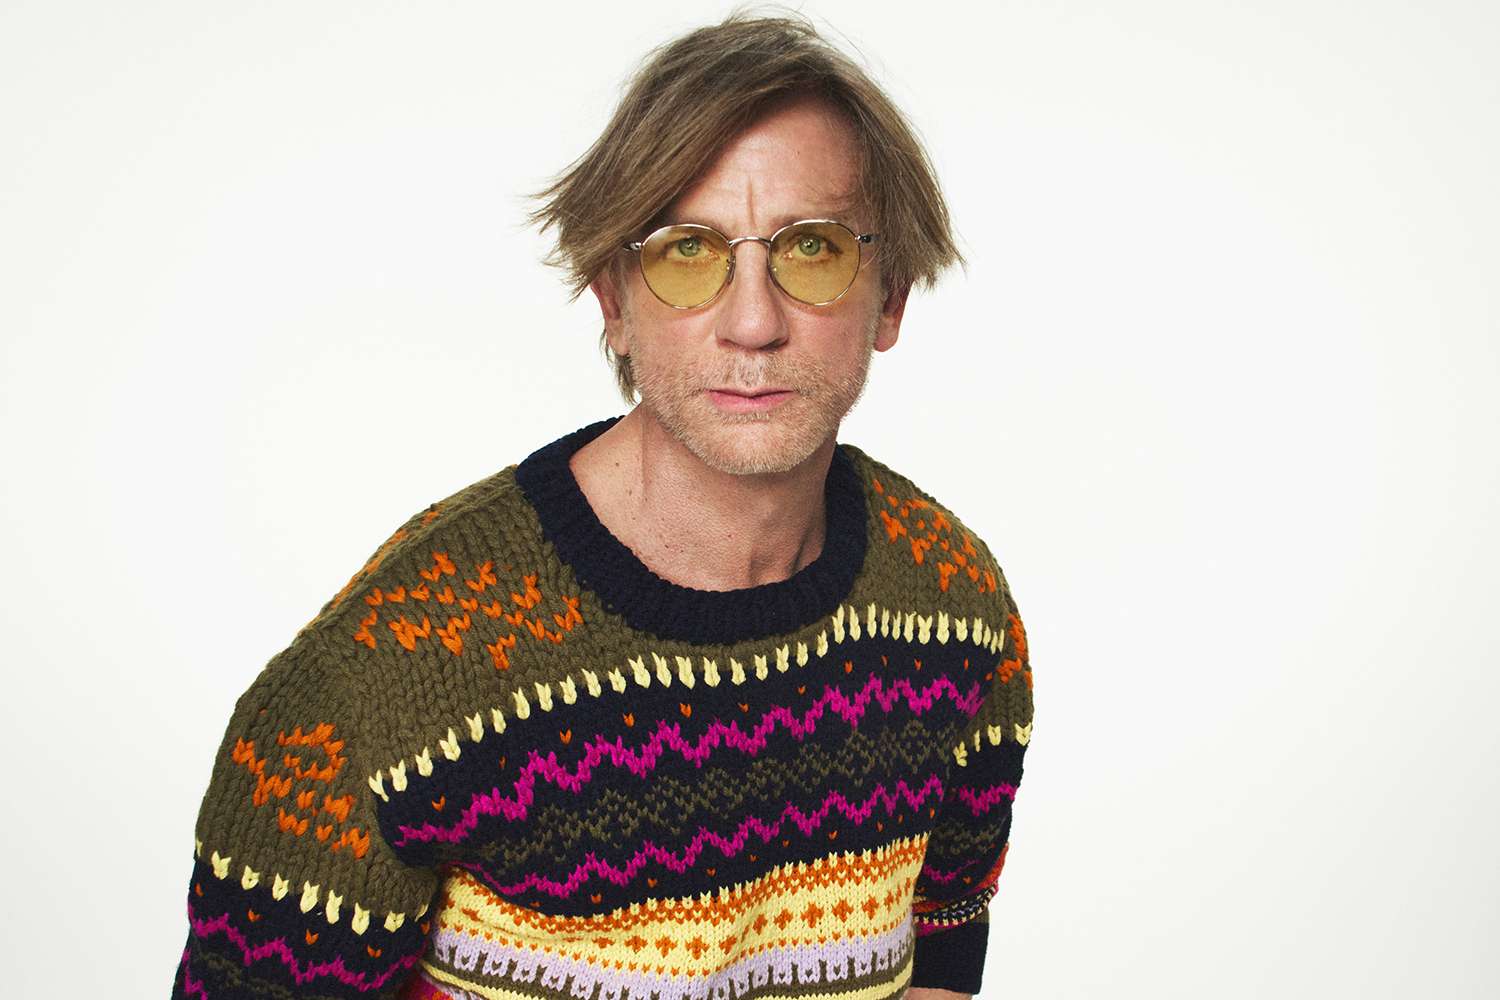 Daniel Craig Is Almost Unrecognizable with Side Bangs and Grandpa Sweater in Loewe’s New Campaign